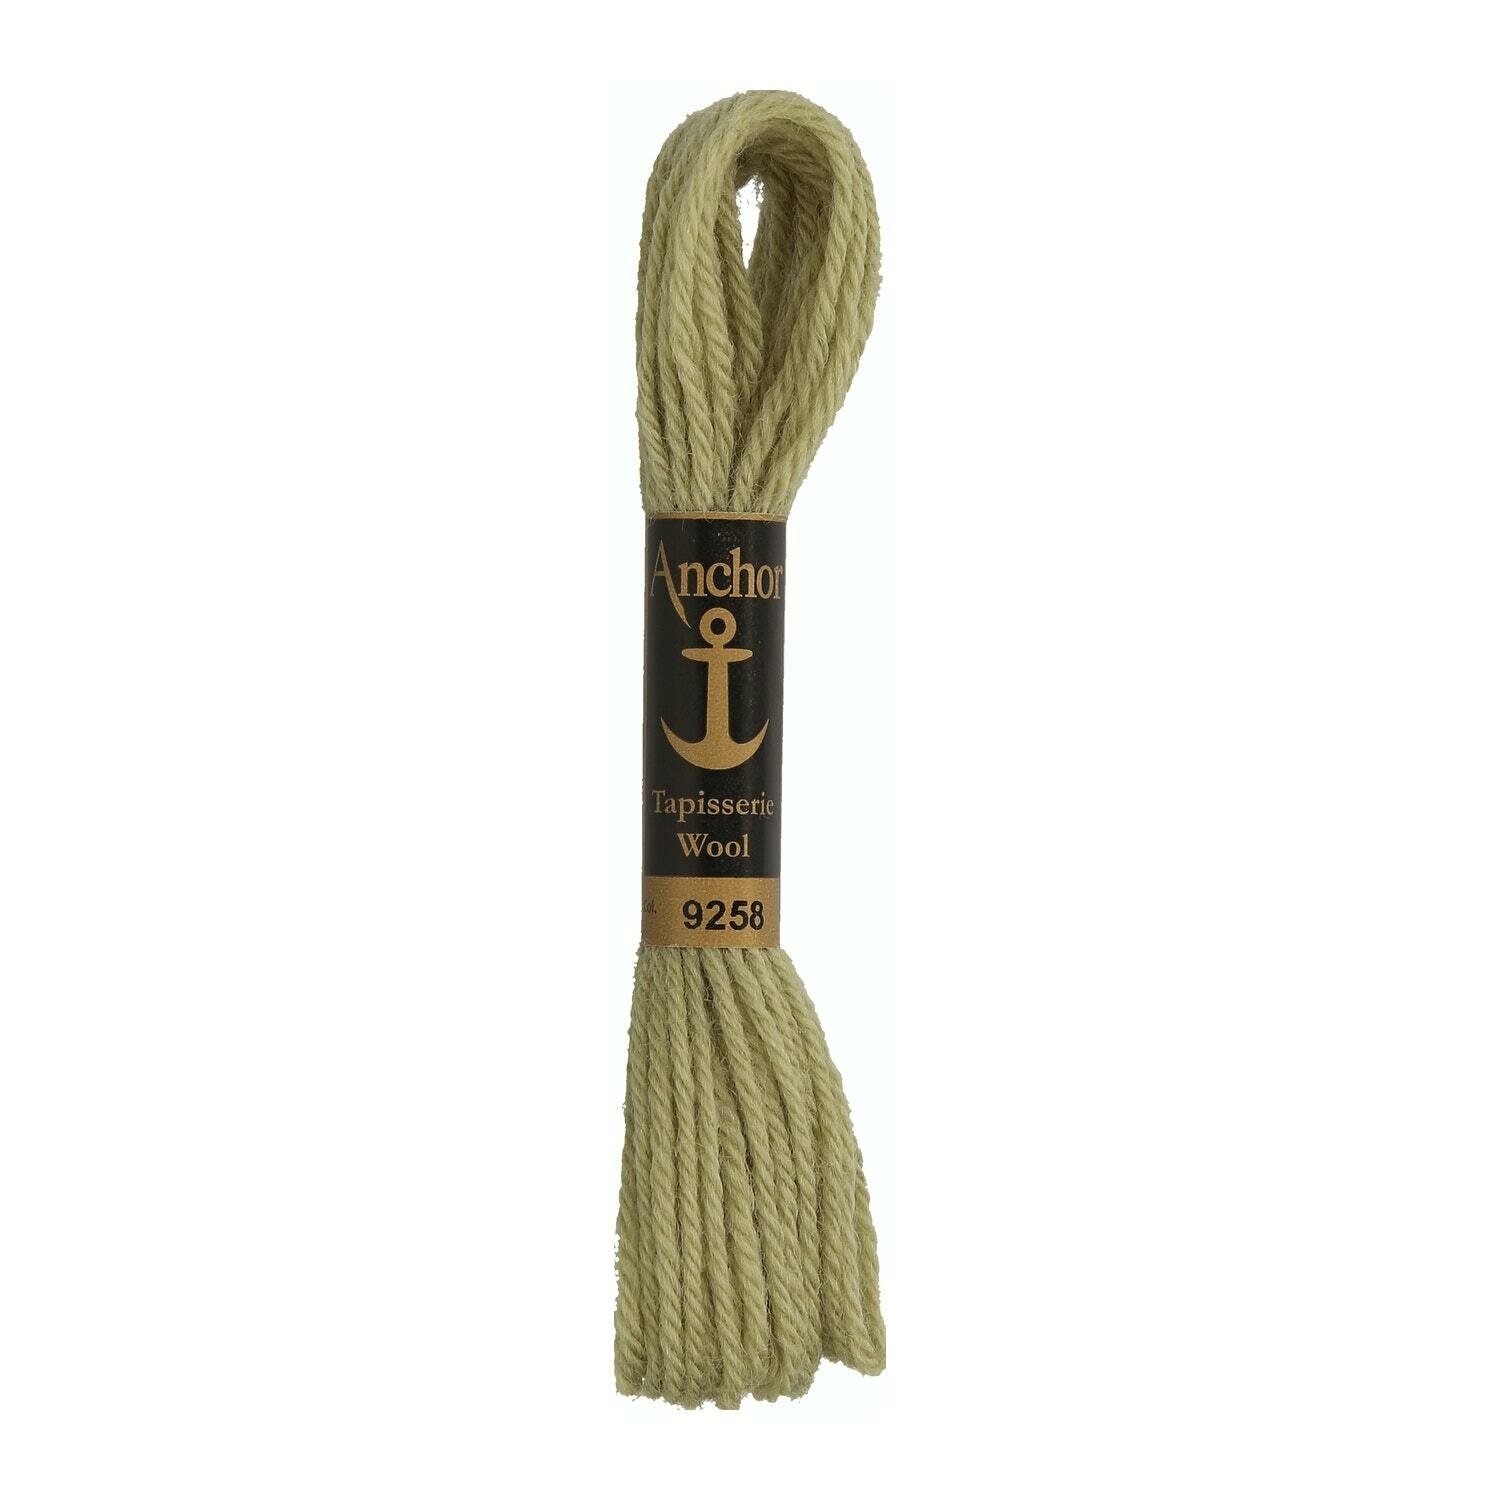 Anchor Tapisserie Wool # 09258